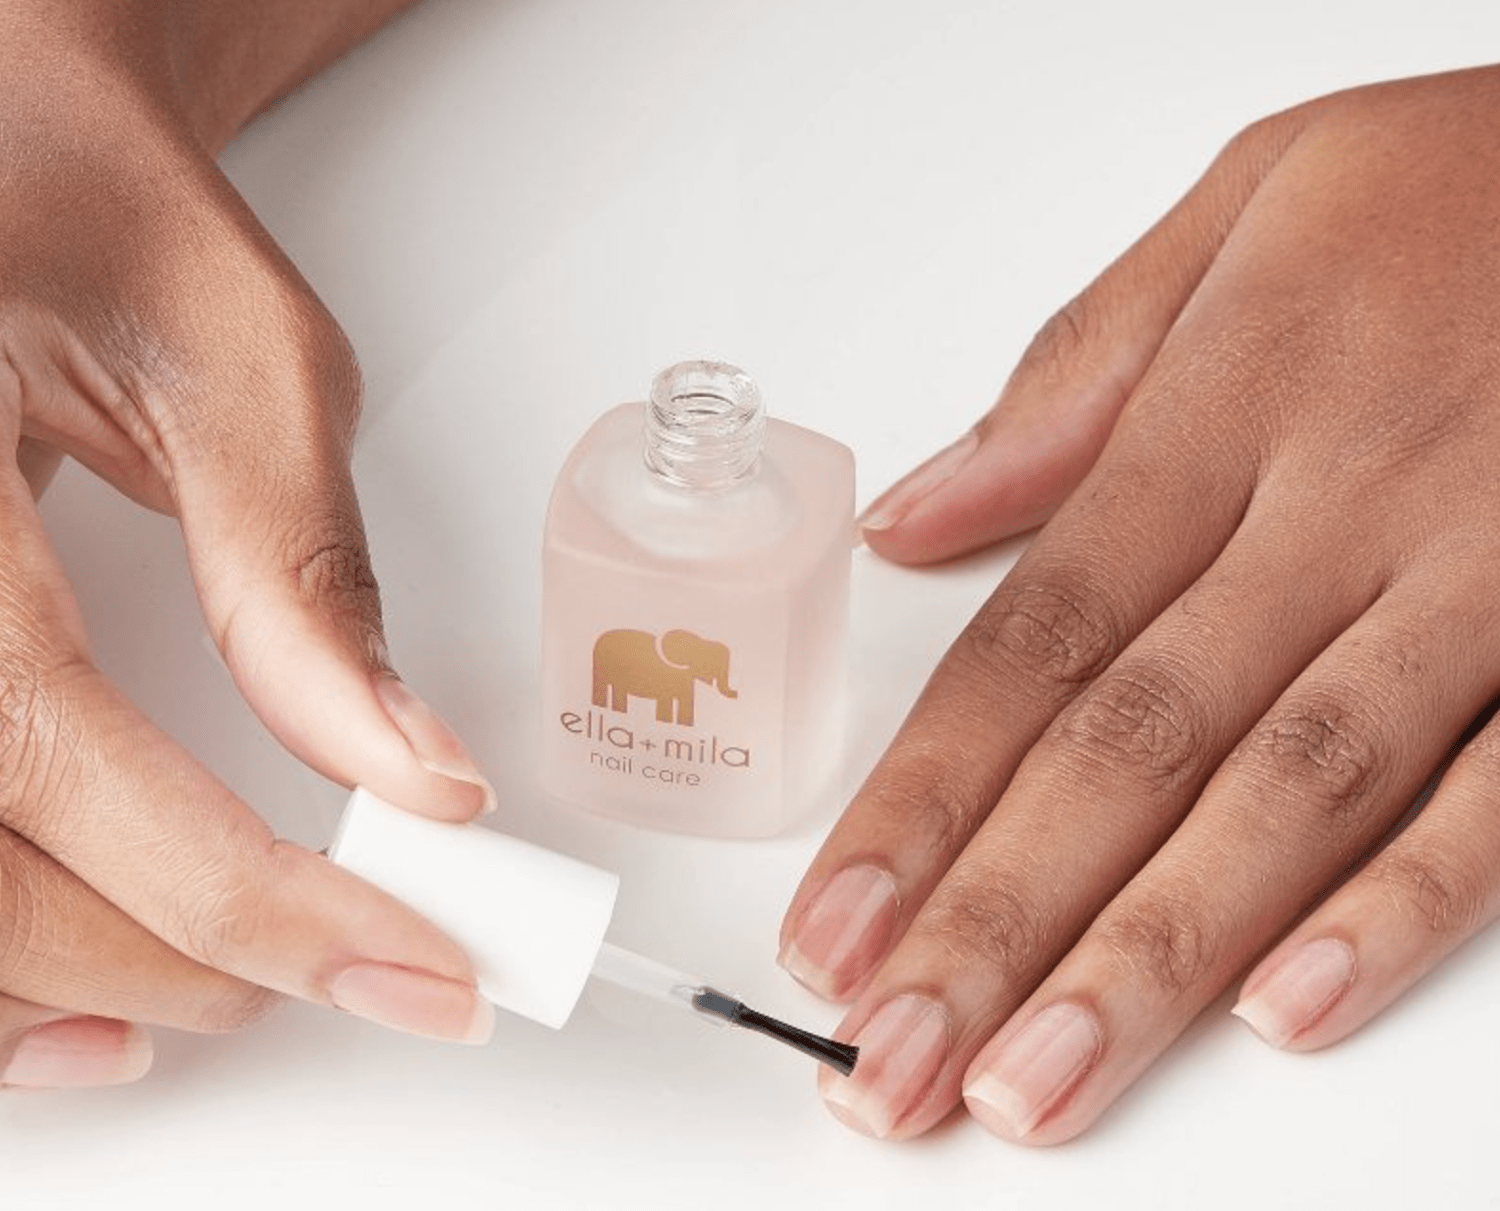 16 best nail strengtheners for thicker, healthier nails - TODAY